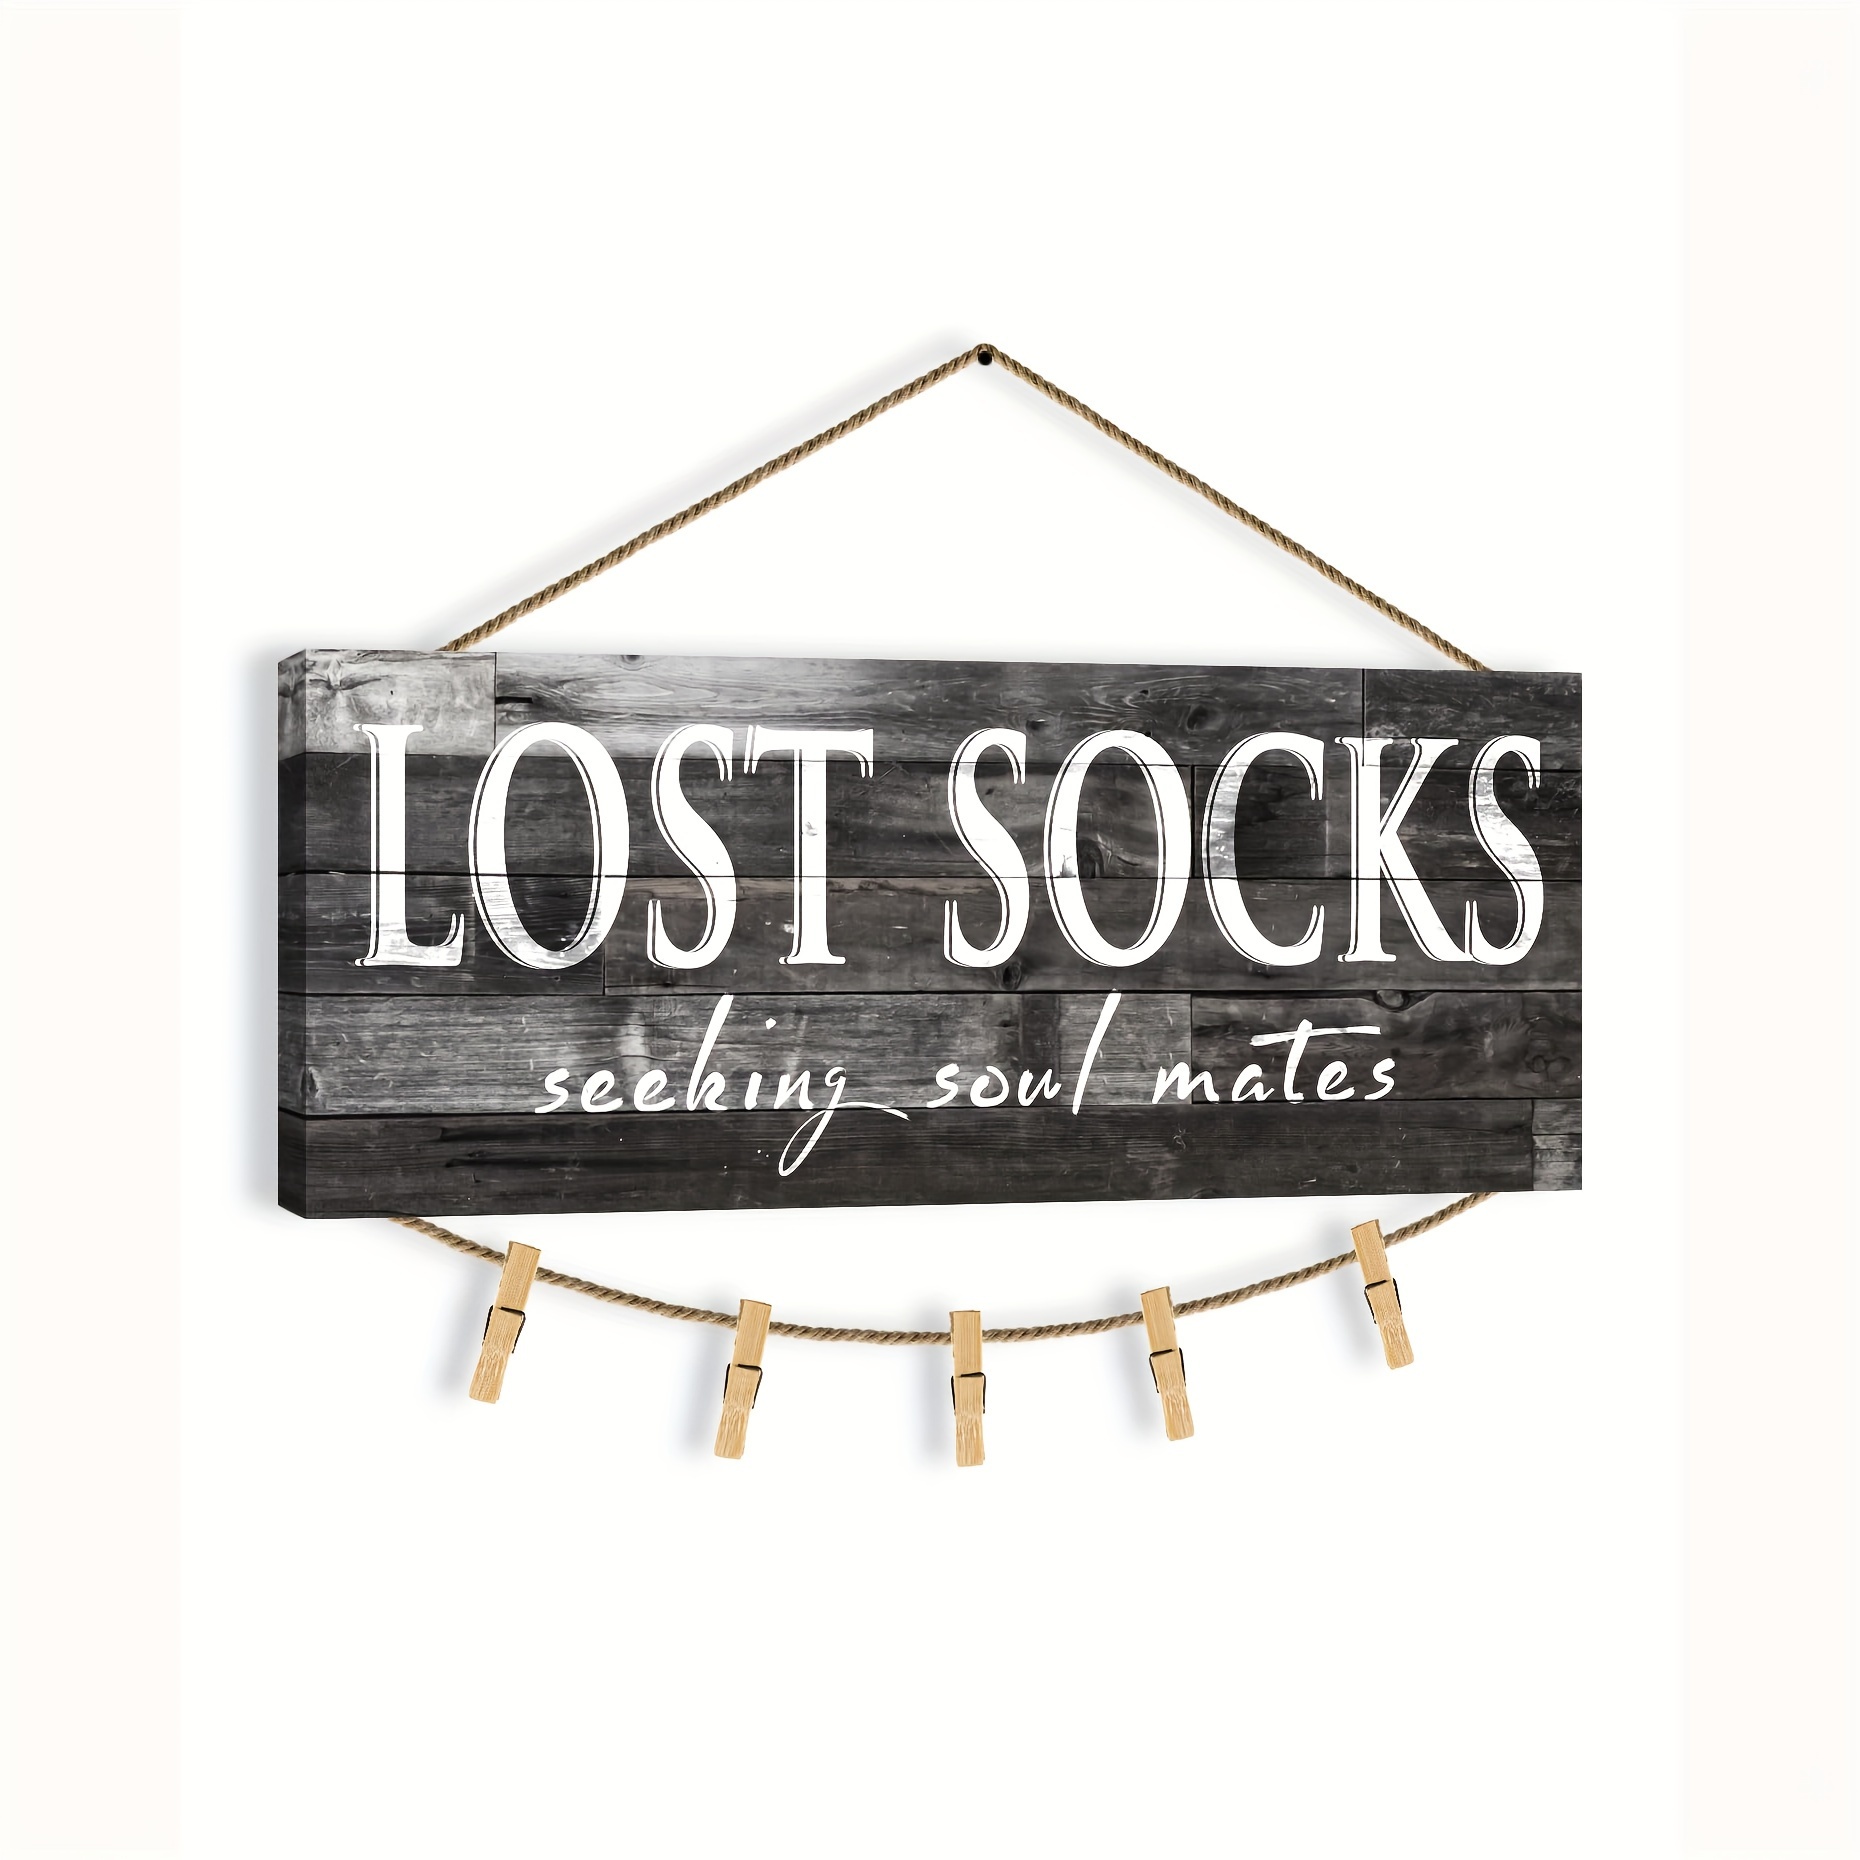 

1pc Lost Socks Laundry Sign, Laundry Room Decor Lost Socks Seeking Soul Mates Laundry Room Wall Decor Missing Socks Sign With 8 Wood Pins, For Home Room Living Room Office Decor